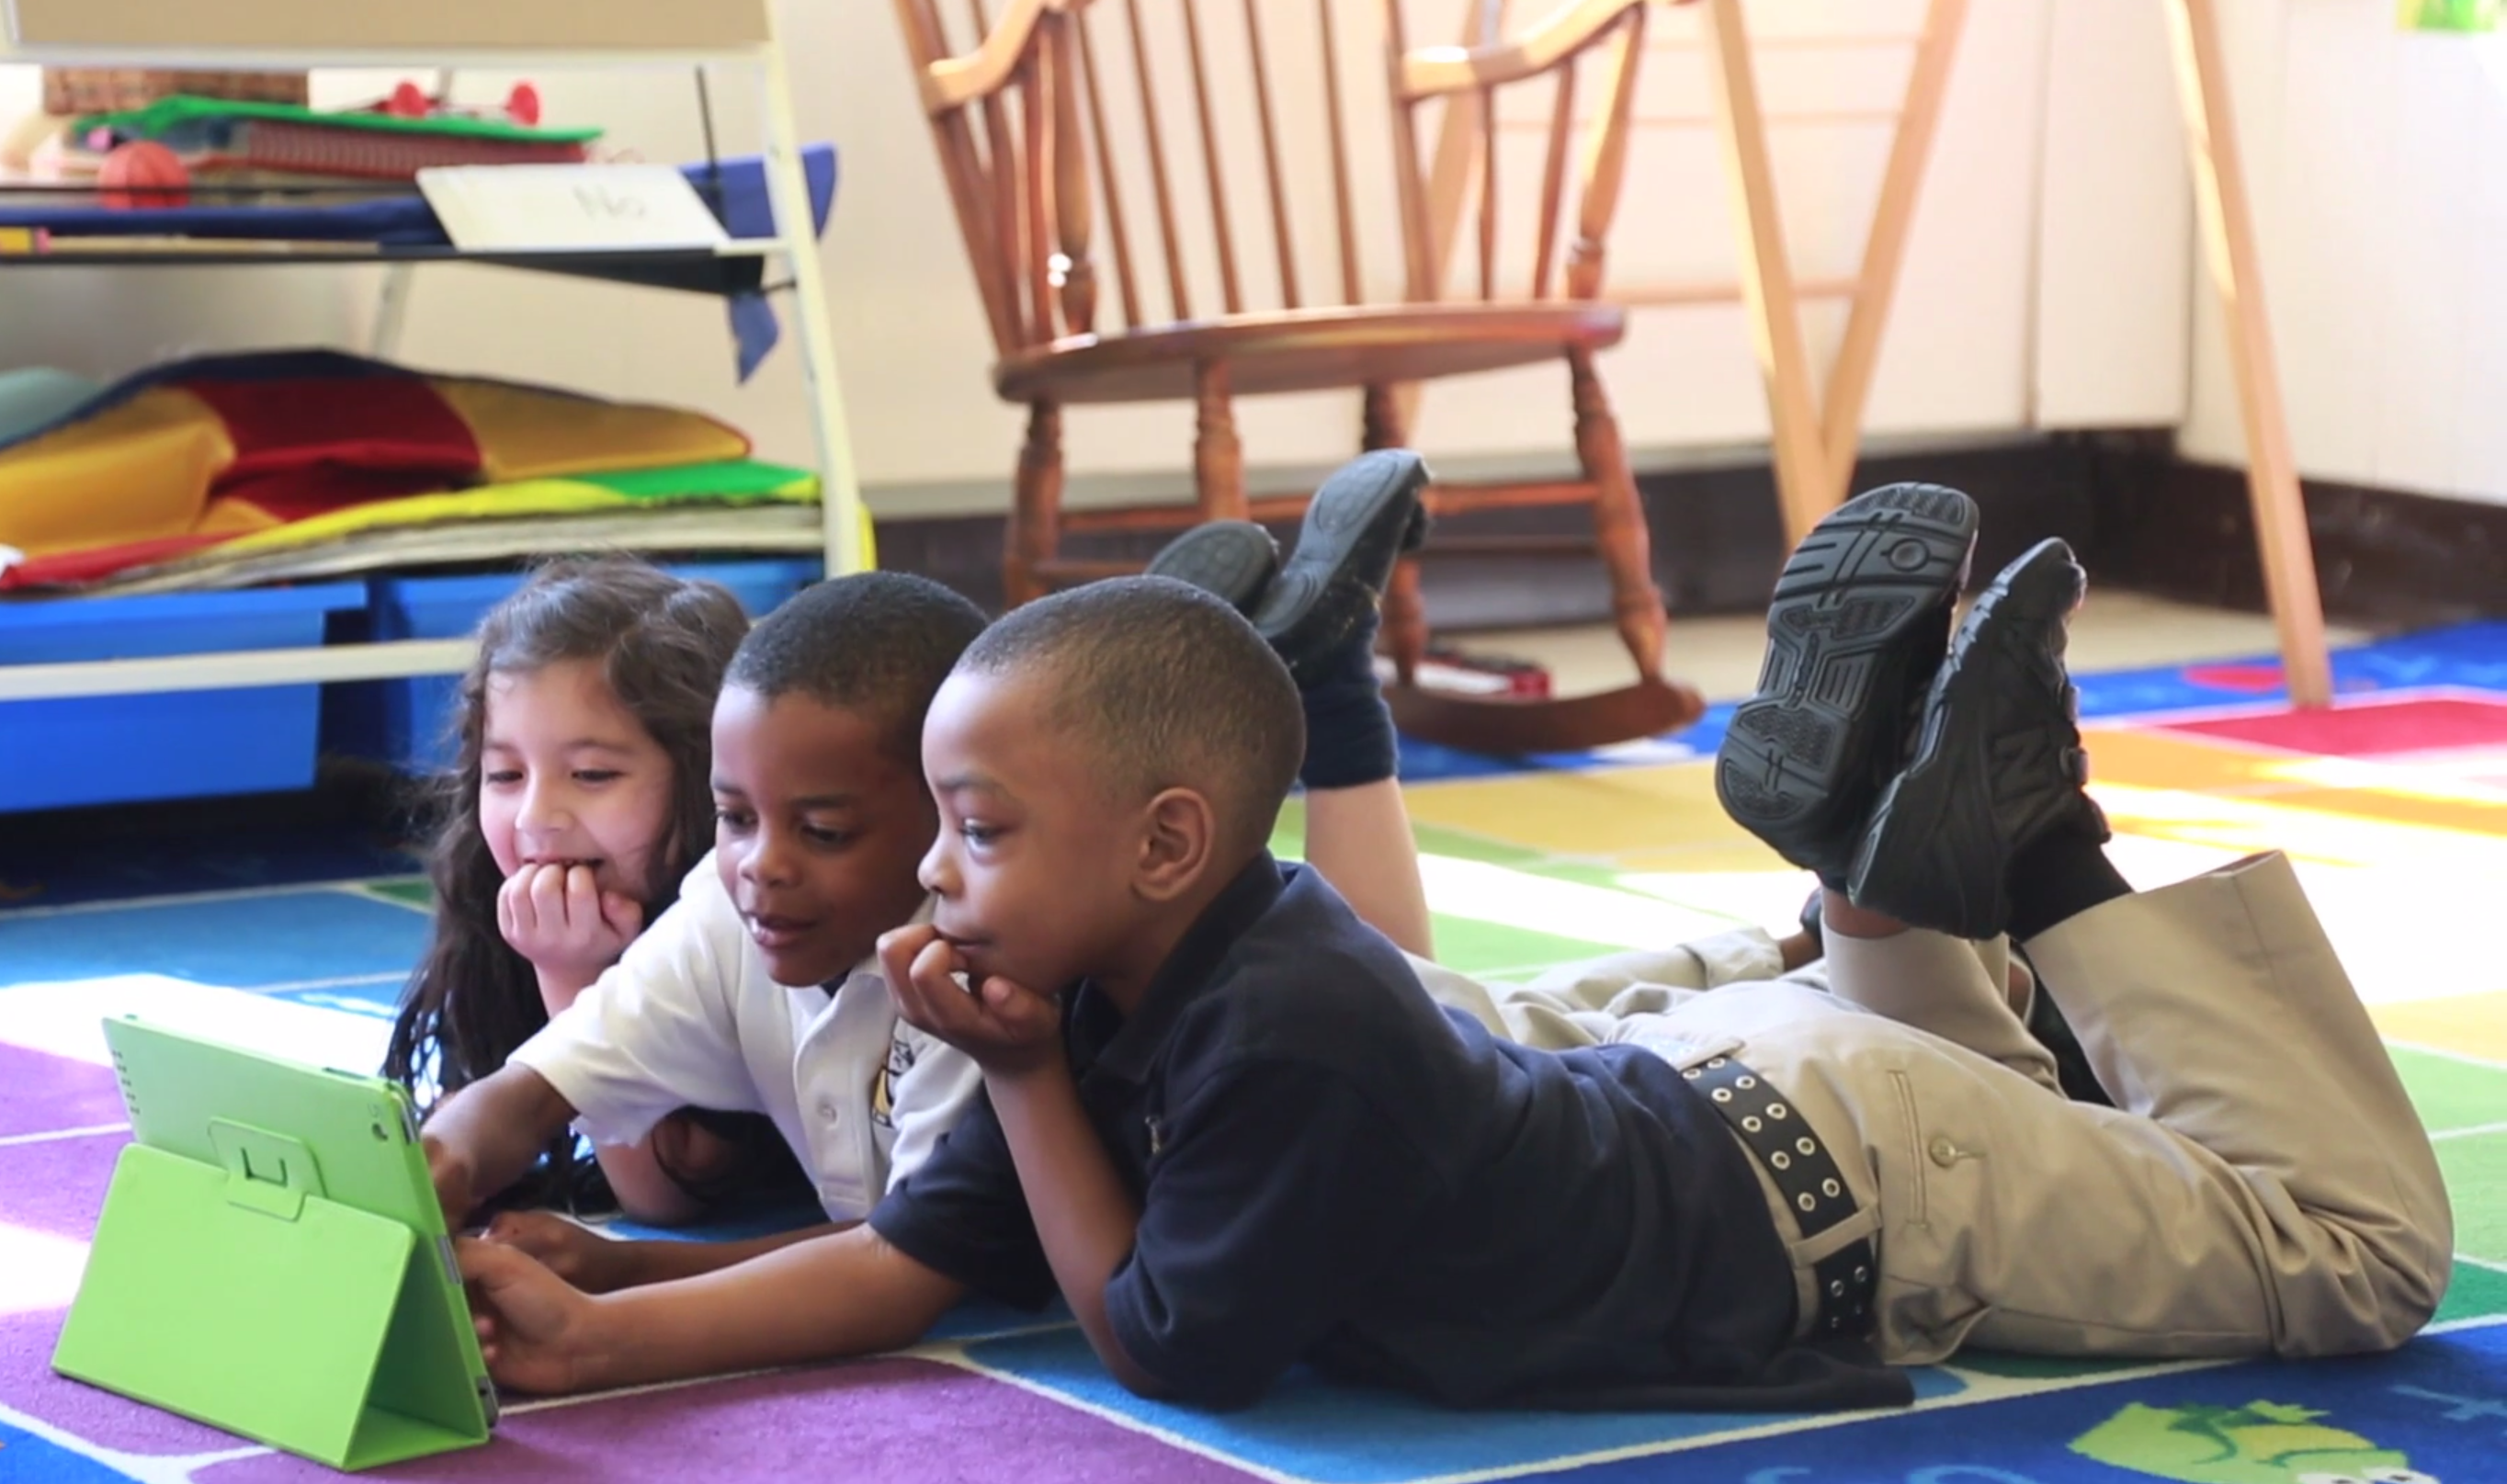 Using iPads to Increase Productivity in Elementary Education